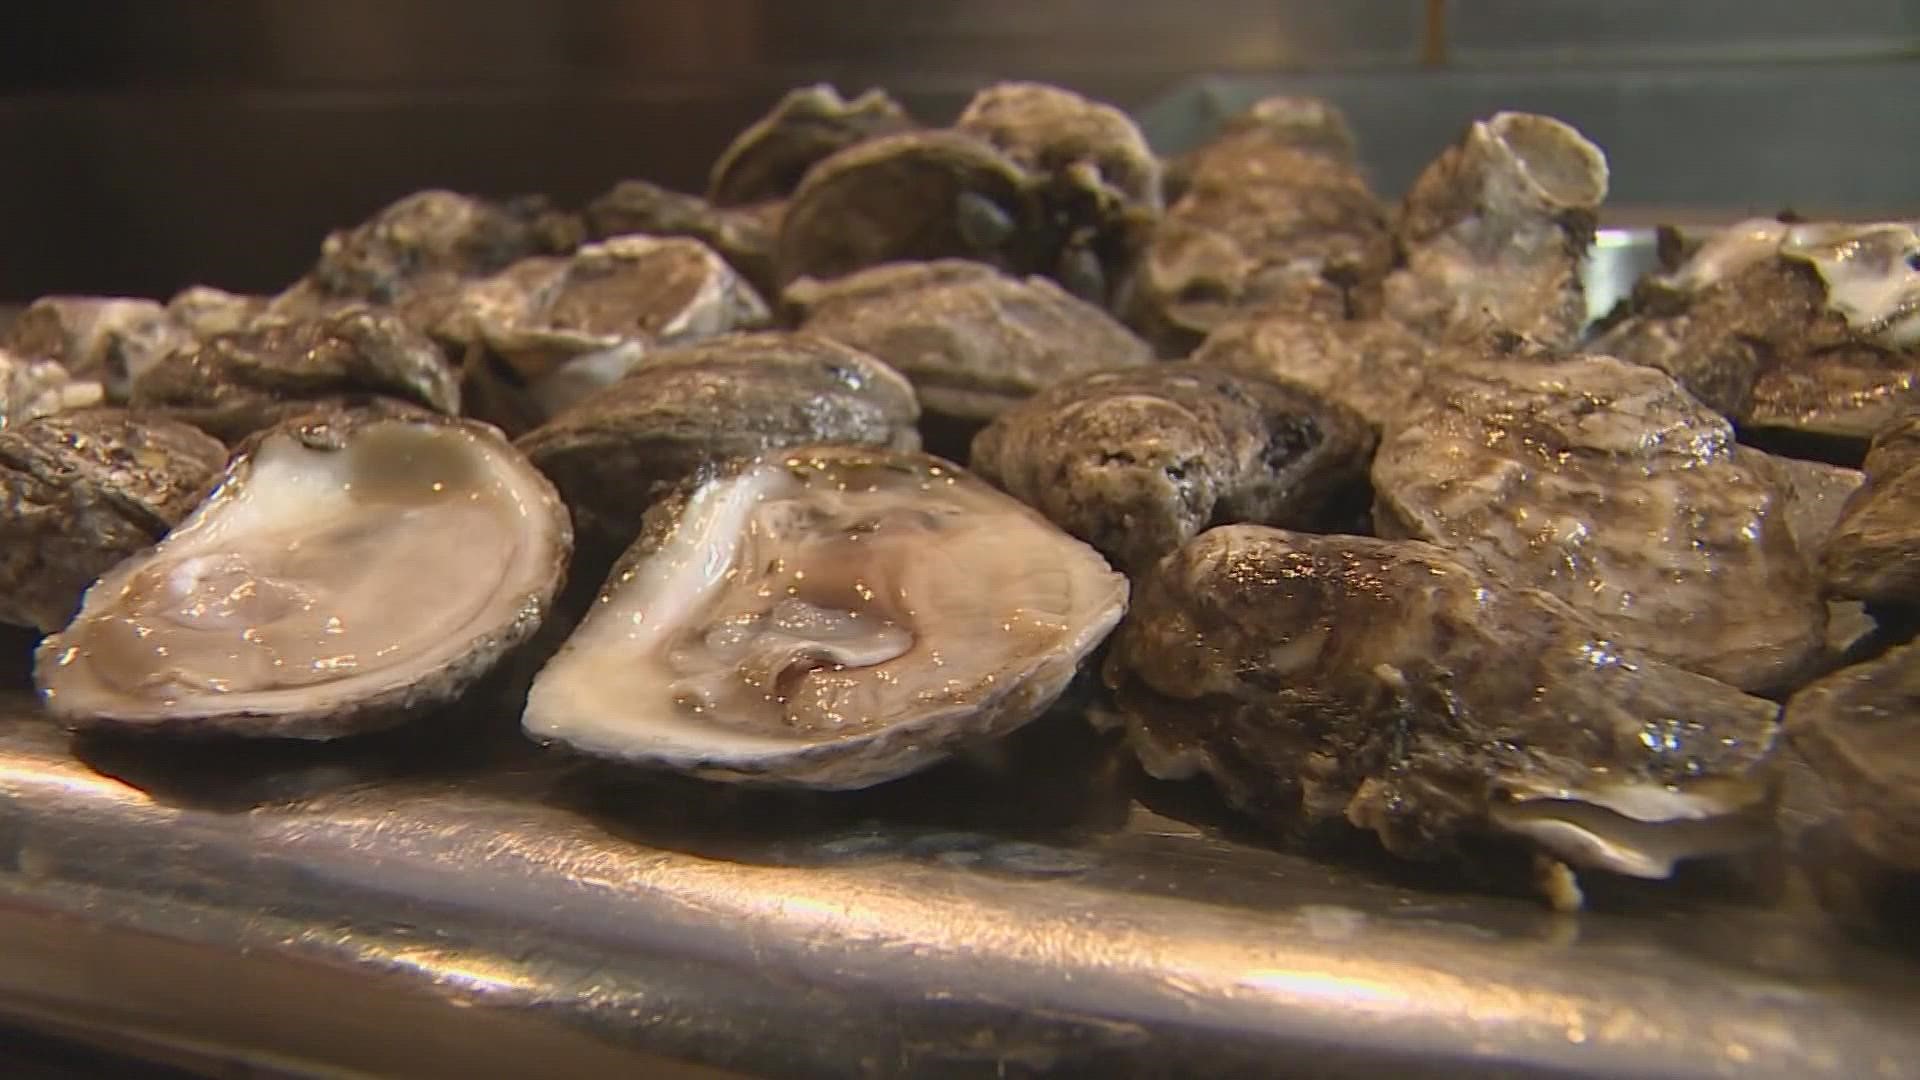 Along with stomach issues, the oysters have also been tied to at least three cases of norovirus, according to the Texas DSHS.